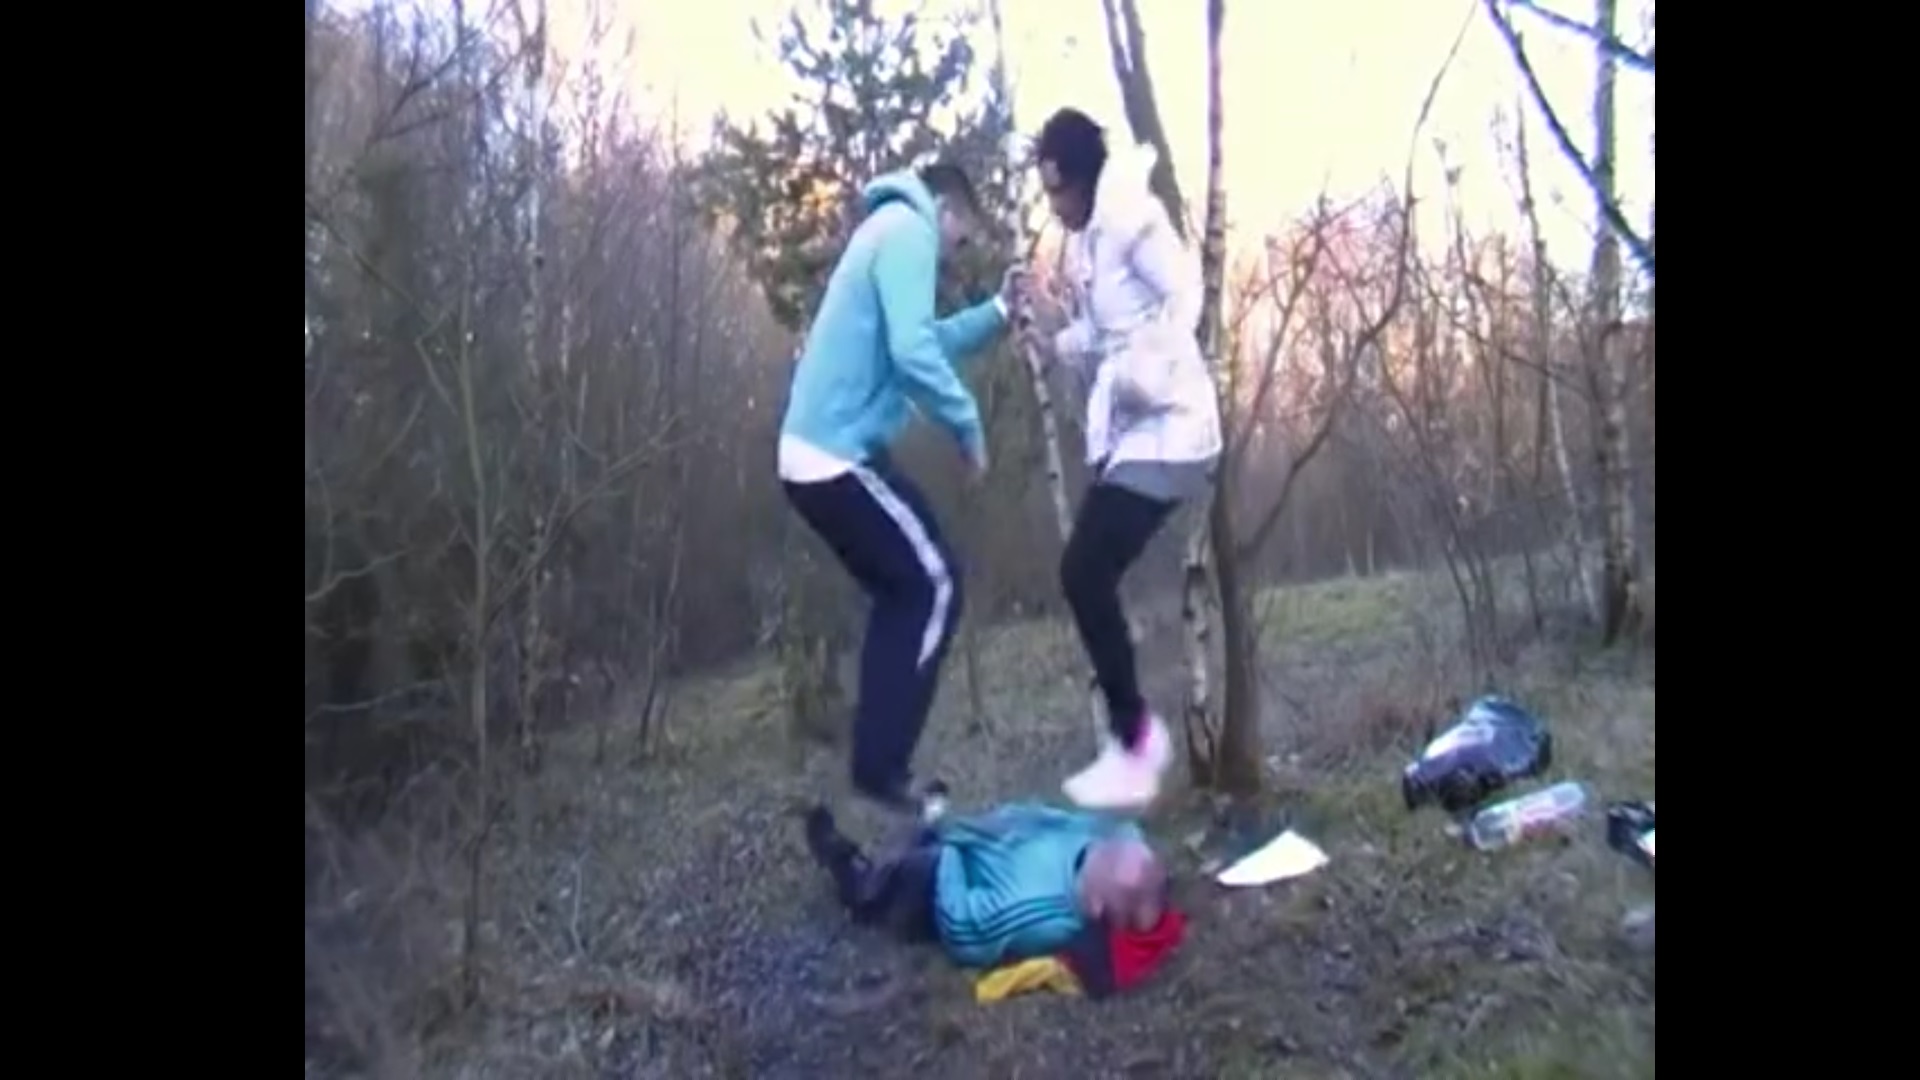 The couple tortures the man they found in the forest